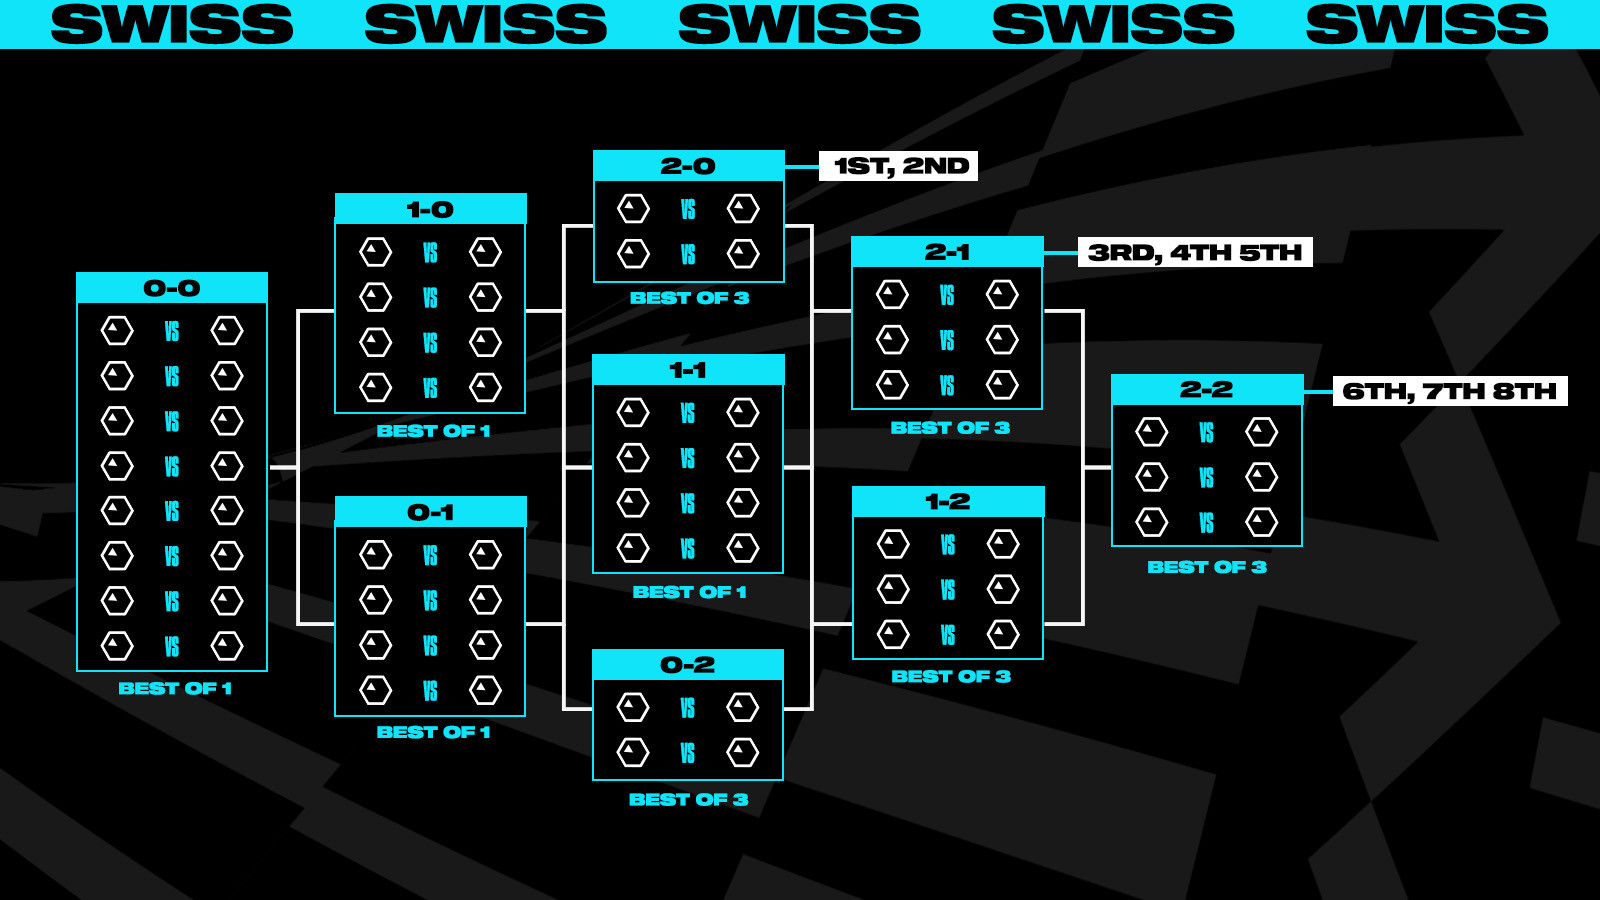 (The Swiss Stage, System of the Worlds 2023 Źródło: Riot Games)